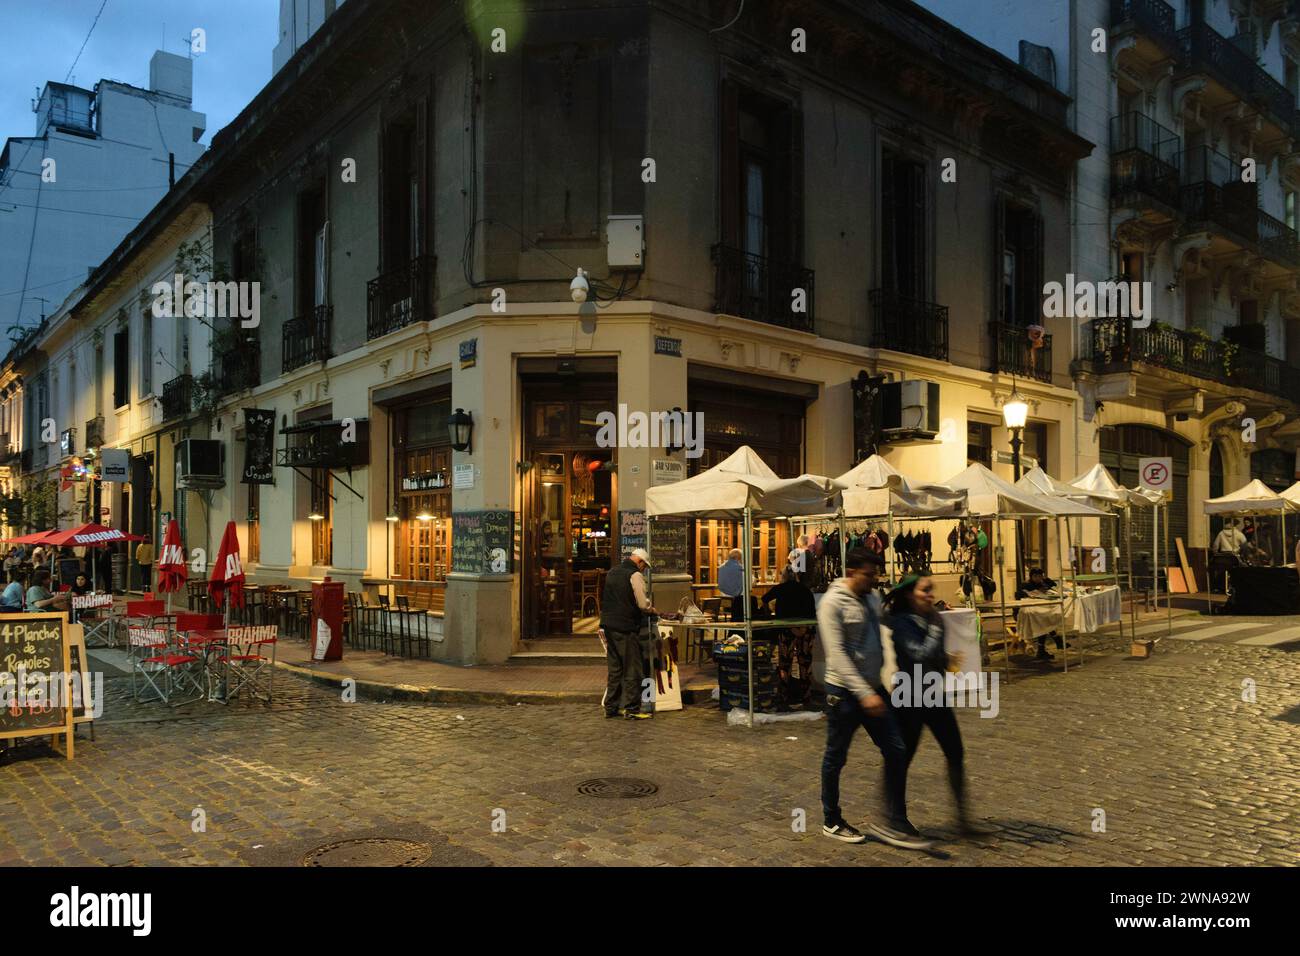 San Telmo is a historic neighborhood located in Buenos Aires, Argentina. It's renowned for its cobblestone streets, colonial architecture. Stock Photo